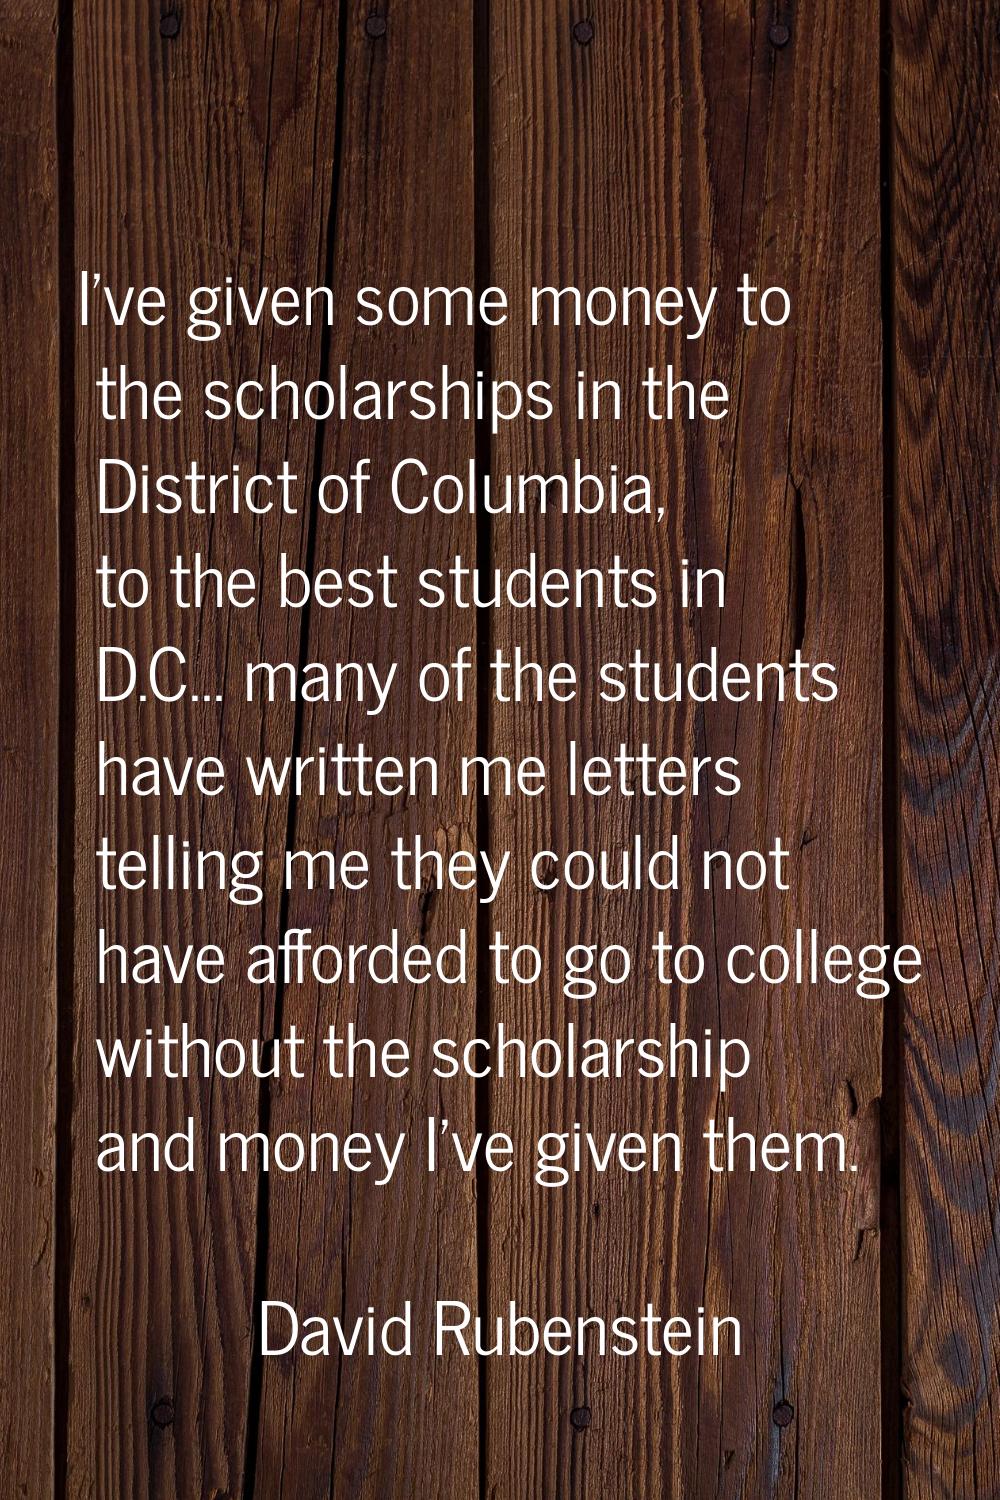 I've given some money to the scholarships in the District of Columbia, to the best students in D.C.